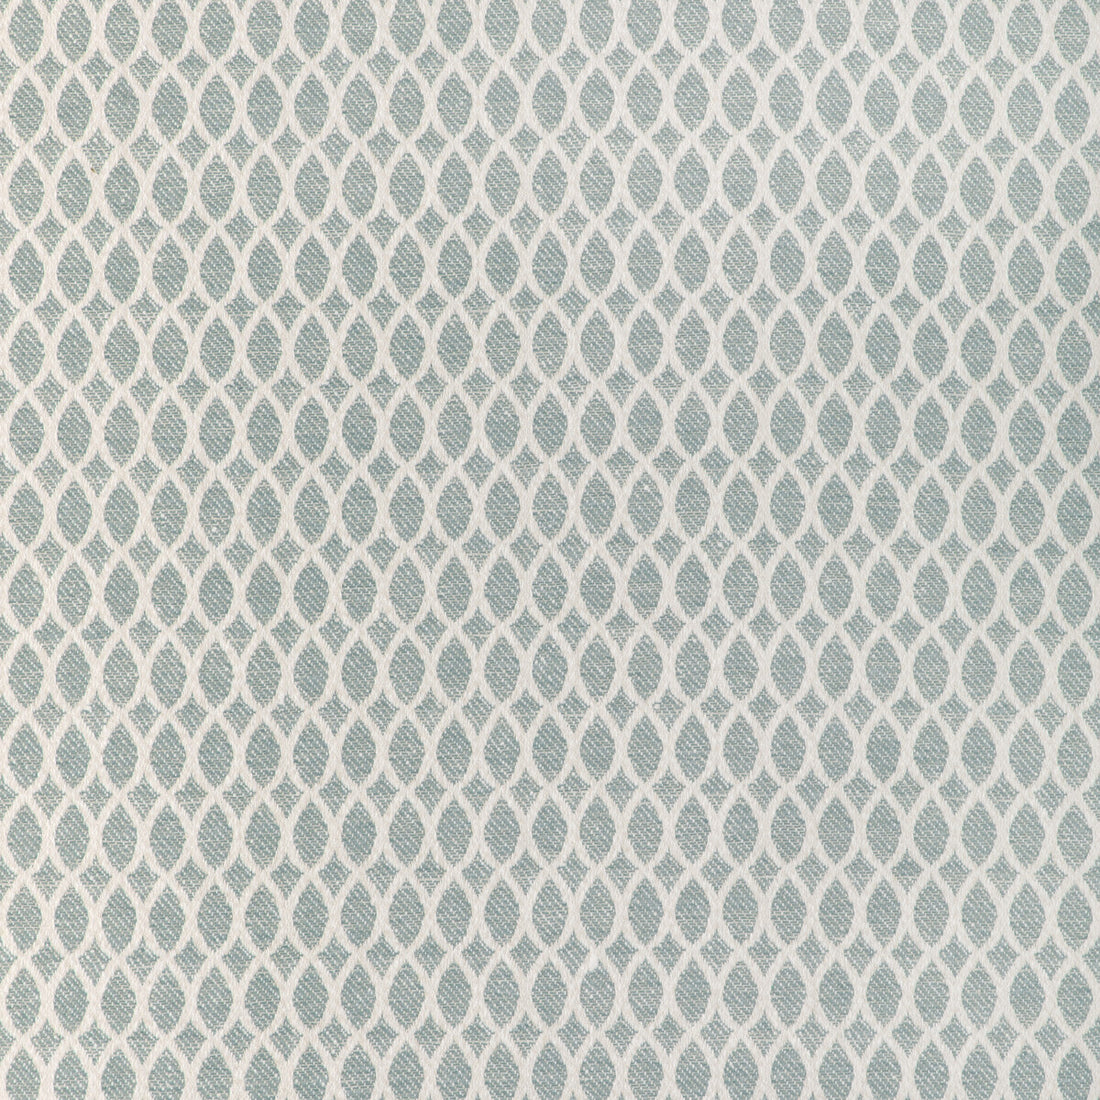 Kravet Design fabric in 37114-15 color - pattern 37114.15.0 - by Kravet Design in the Woven Colors collection